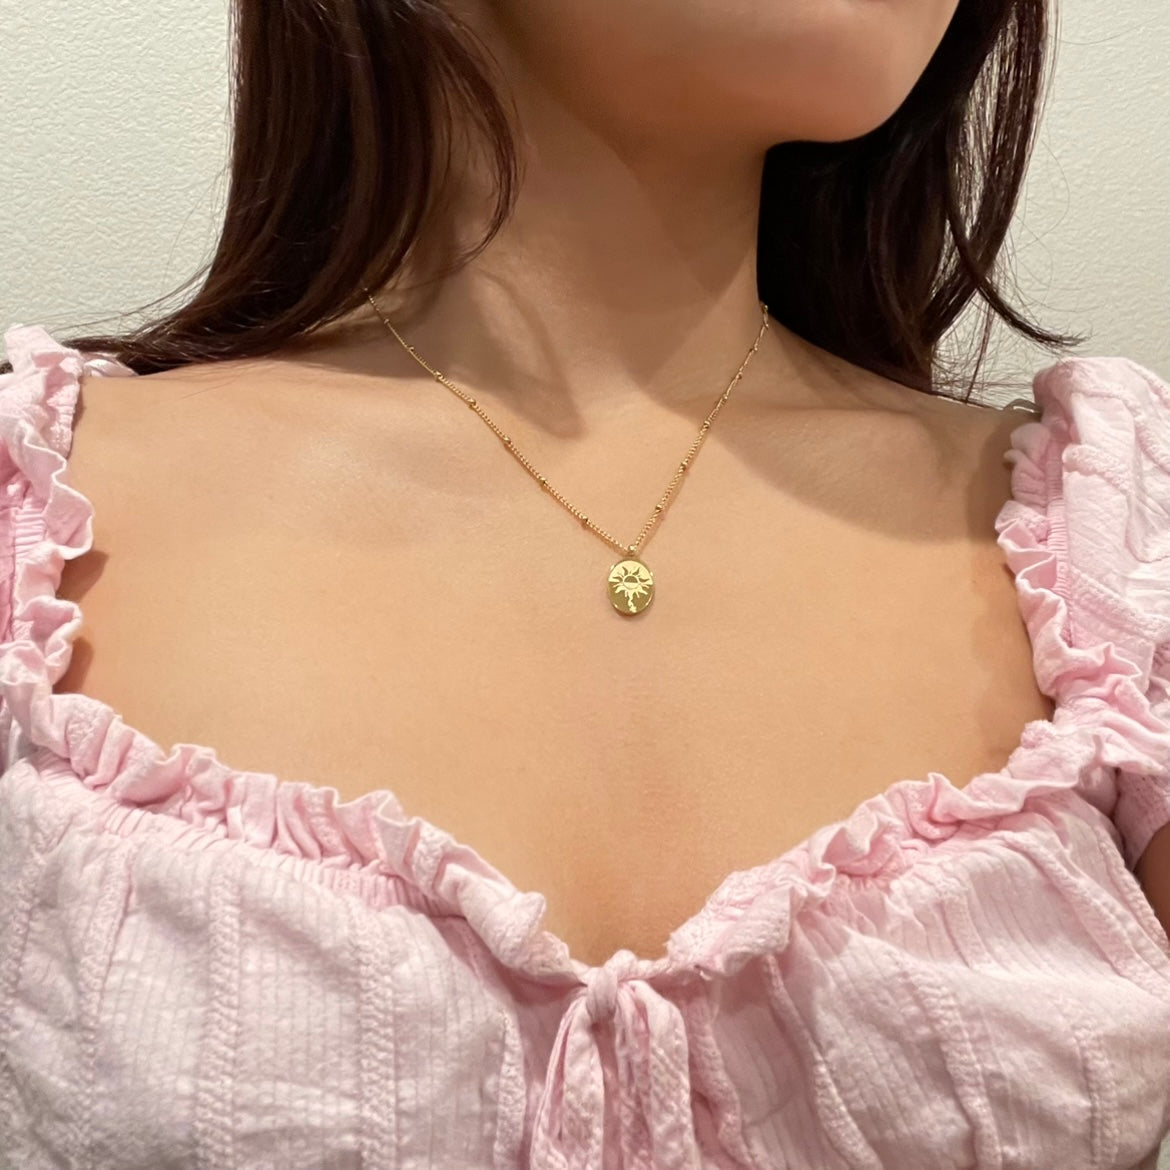 Strong Enough Dainty Necklace